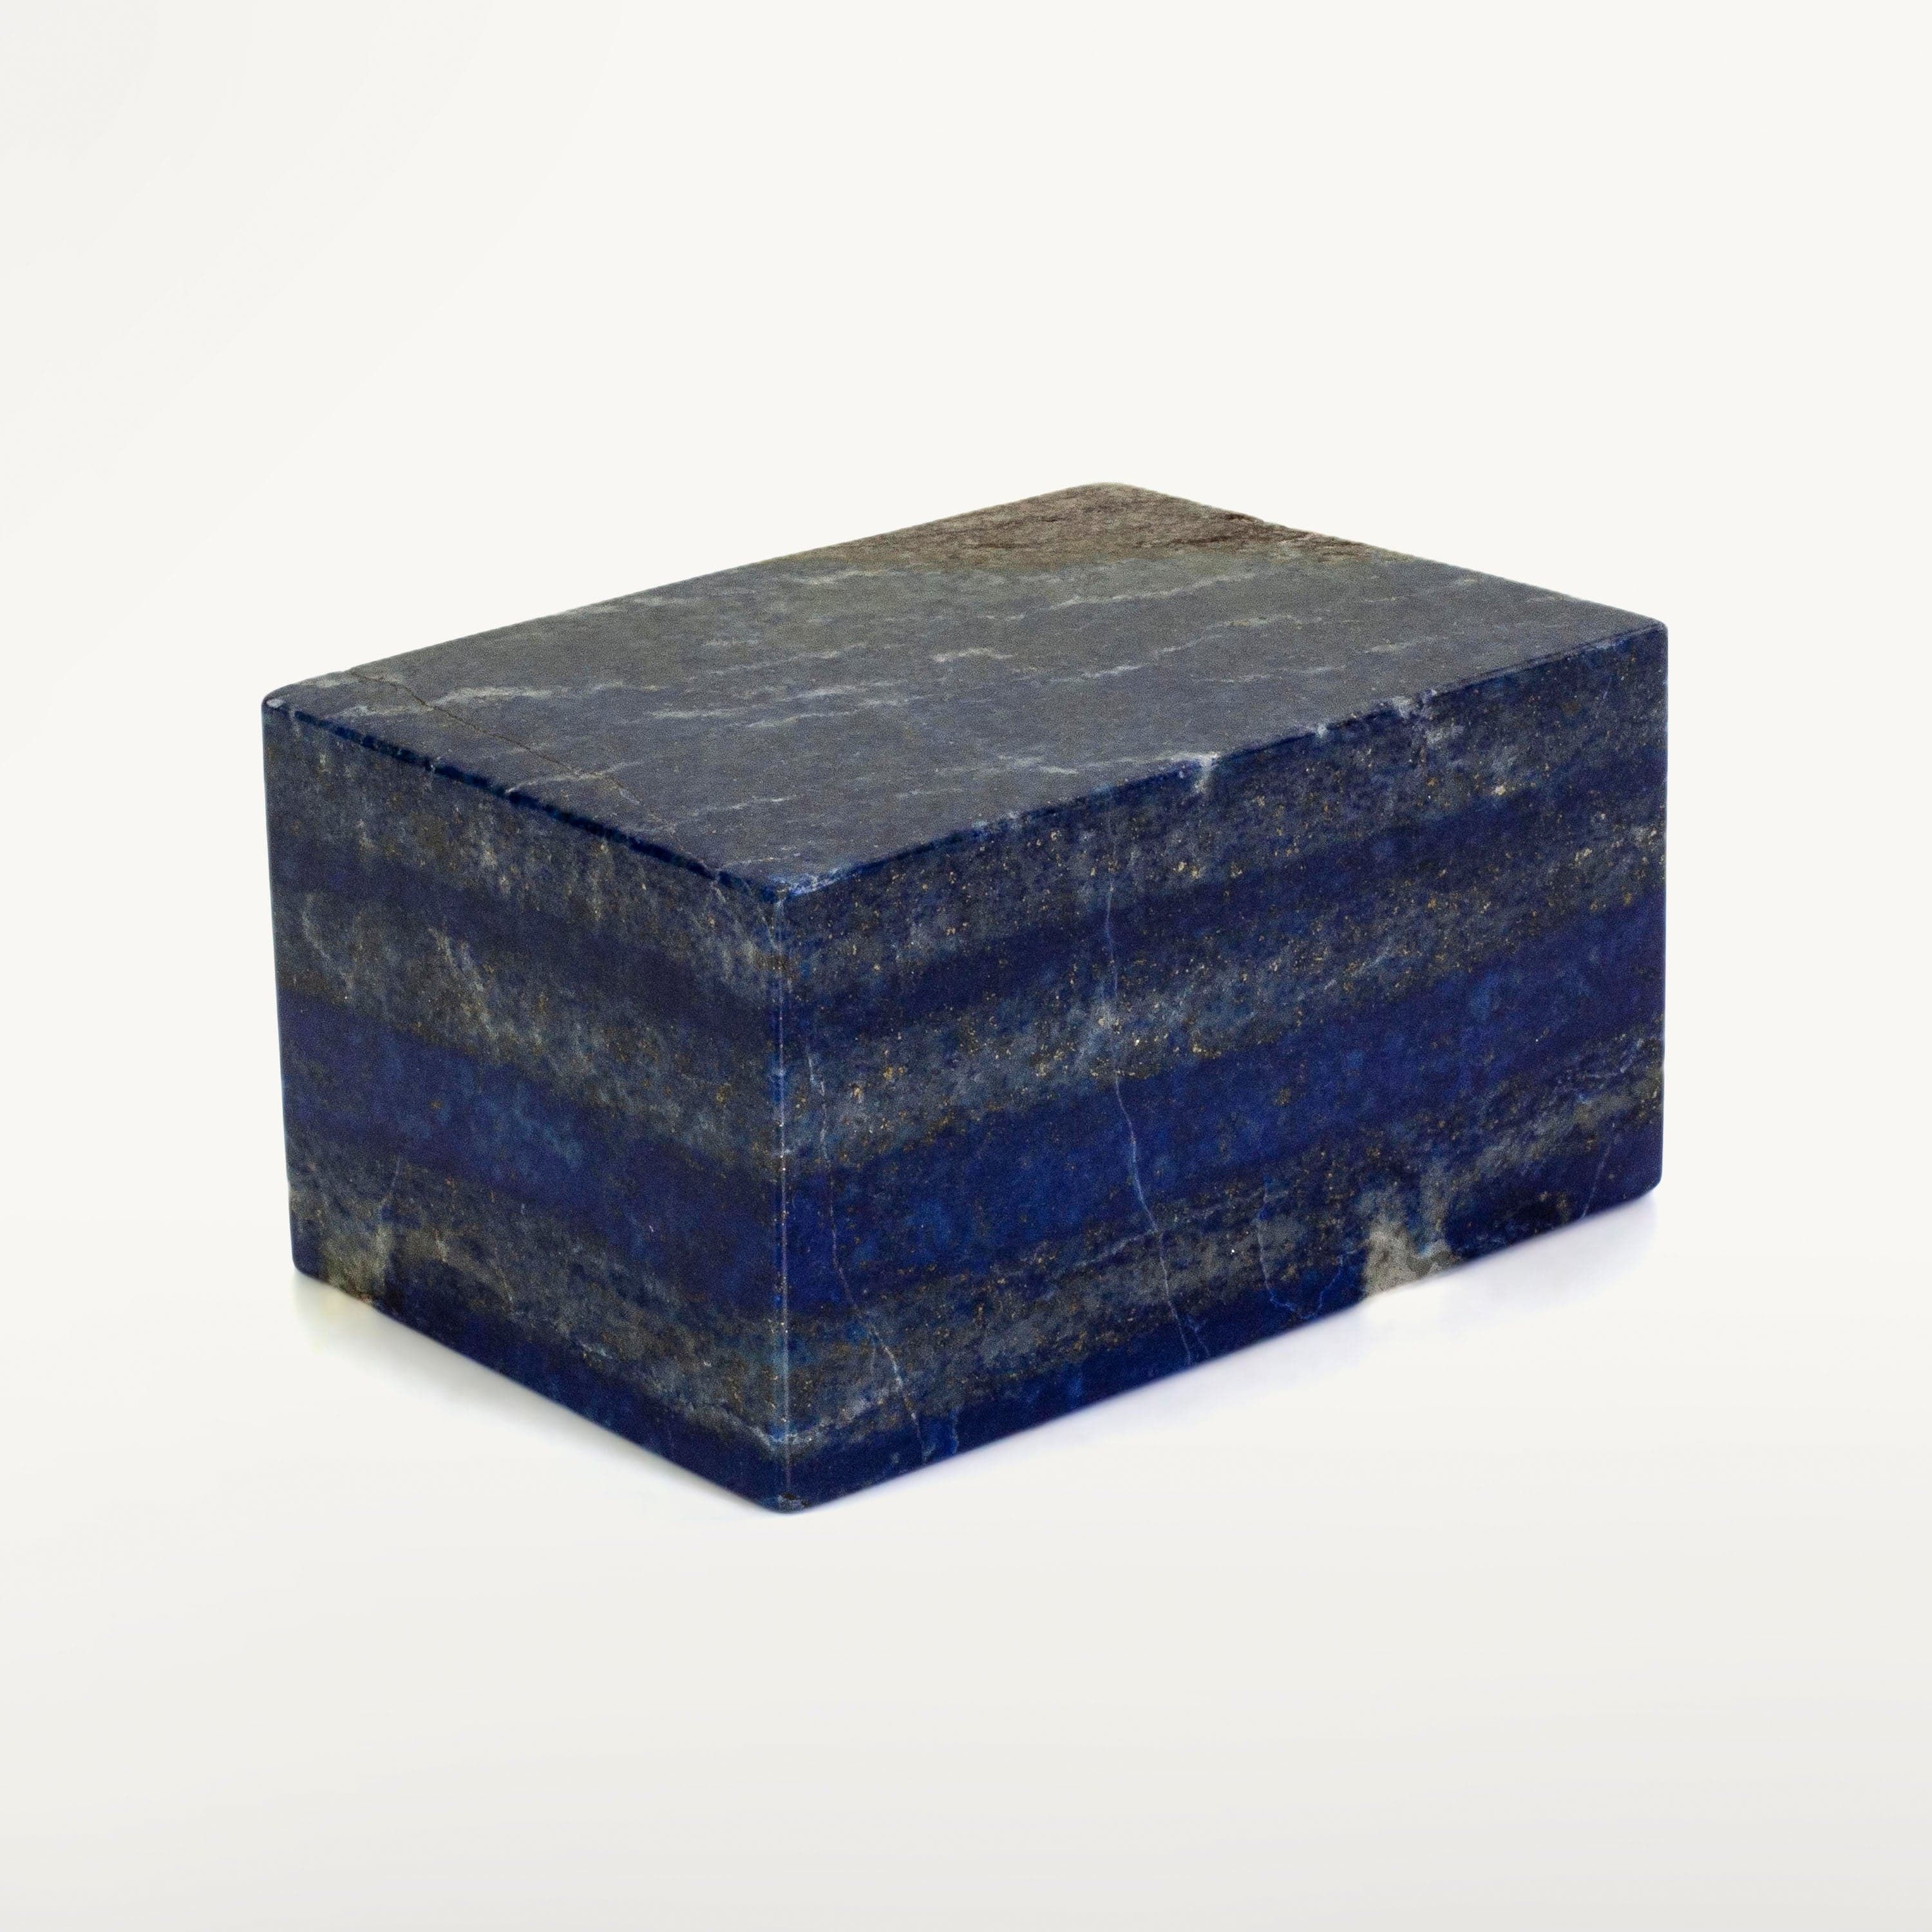 Kalifano Lapis Lapis Lazuil Cube from Afghanistan - 640 g / 1.4 lbs LP700.004